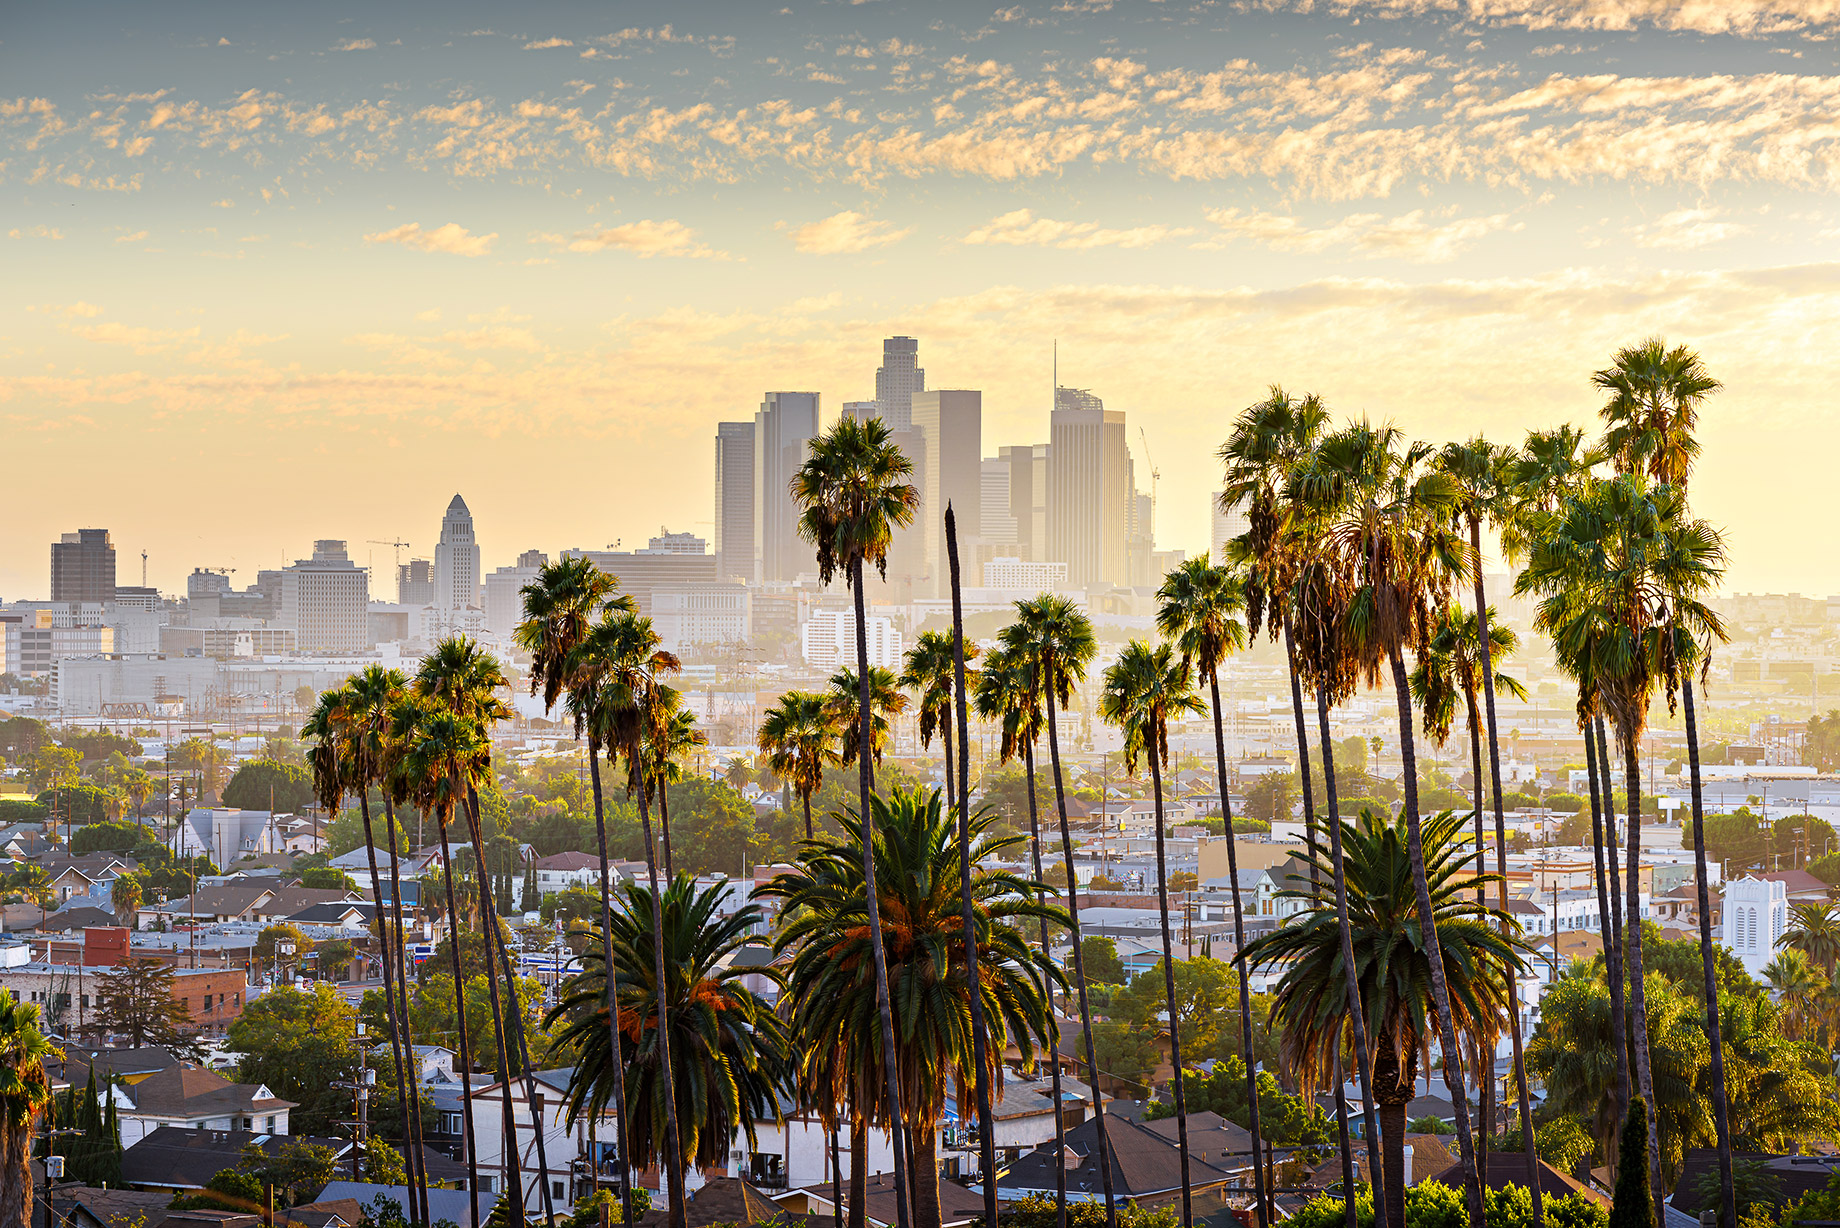 Cityscape with Palm Trees at Sunset – Los Angeles, California, USA